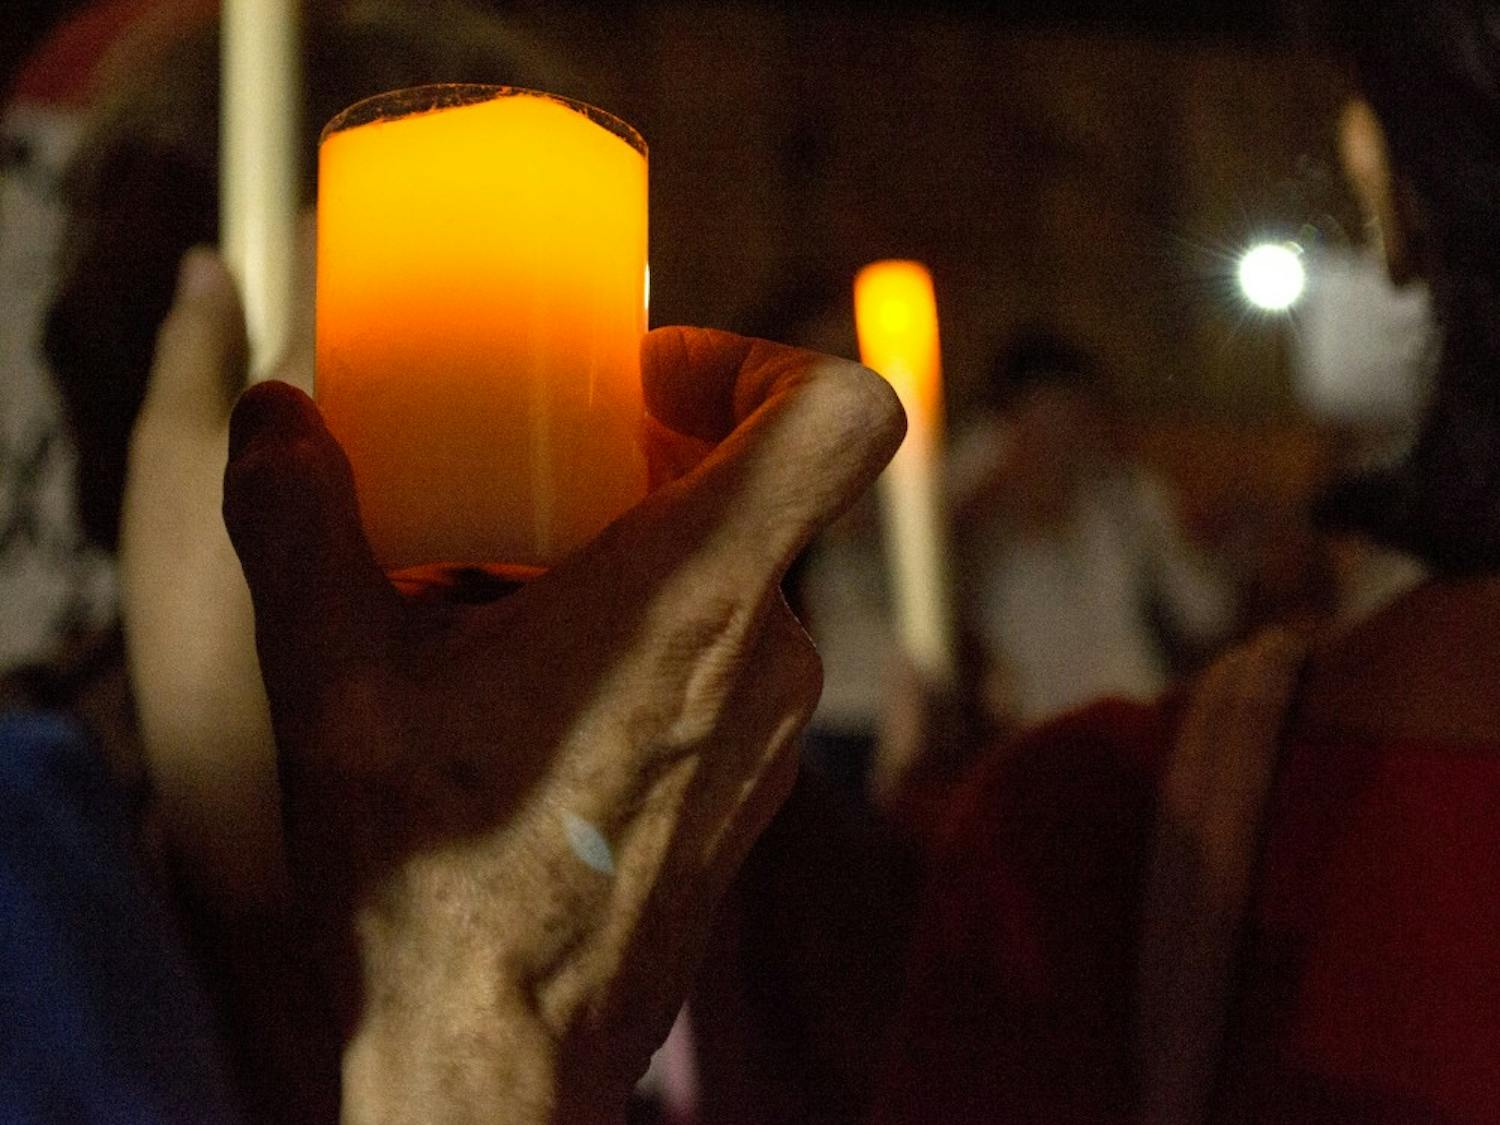 Attendees hold candles at an immigrant vigil held thursday night in Albuquerque’s Barelas community.